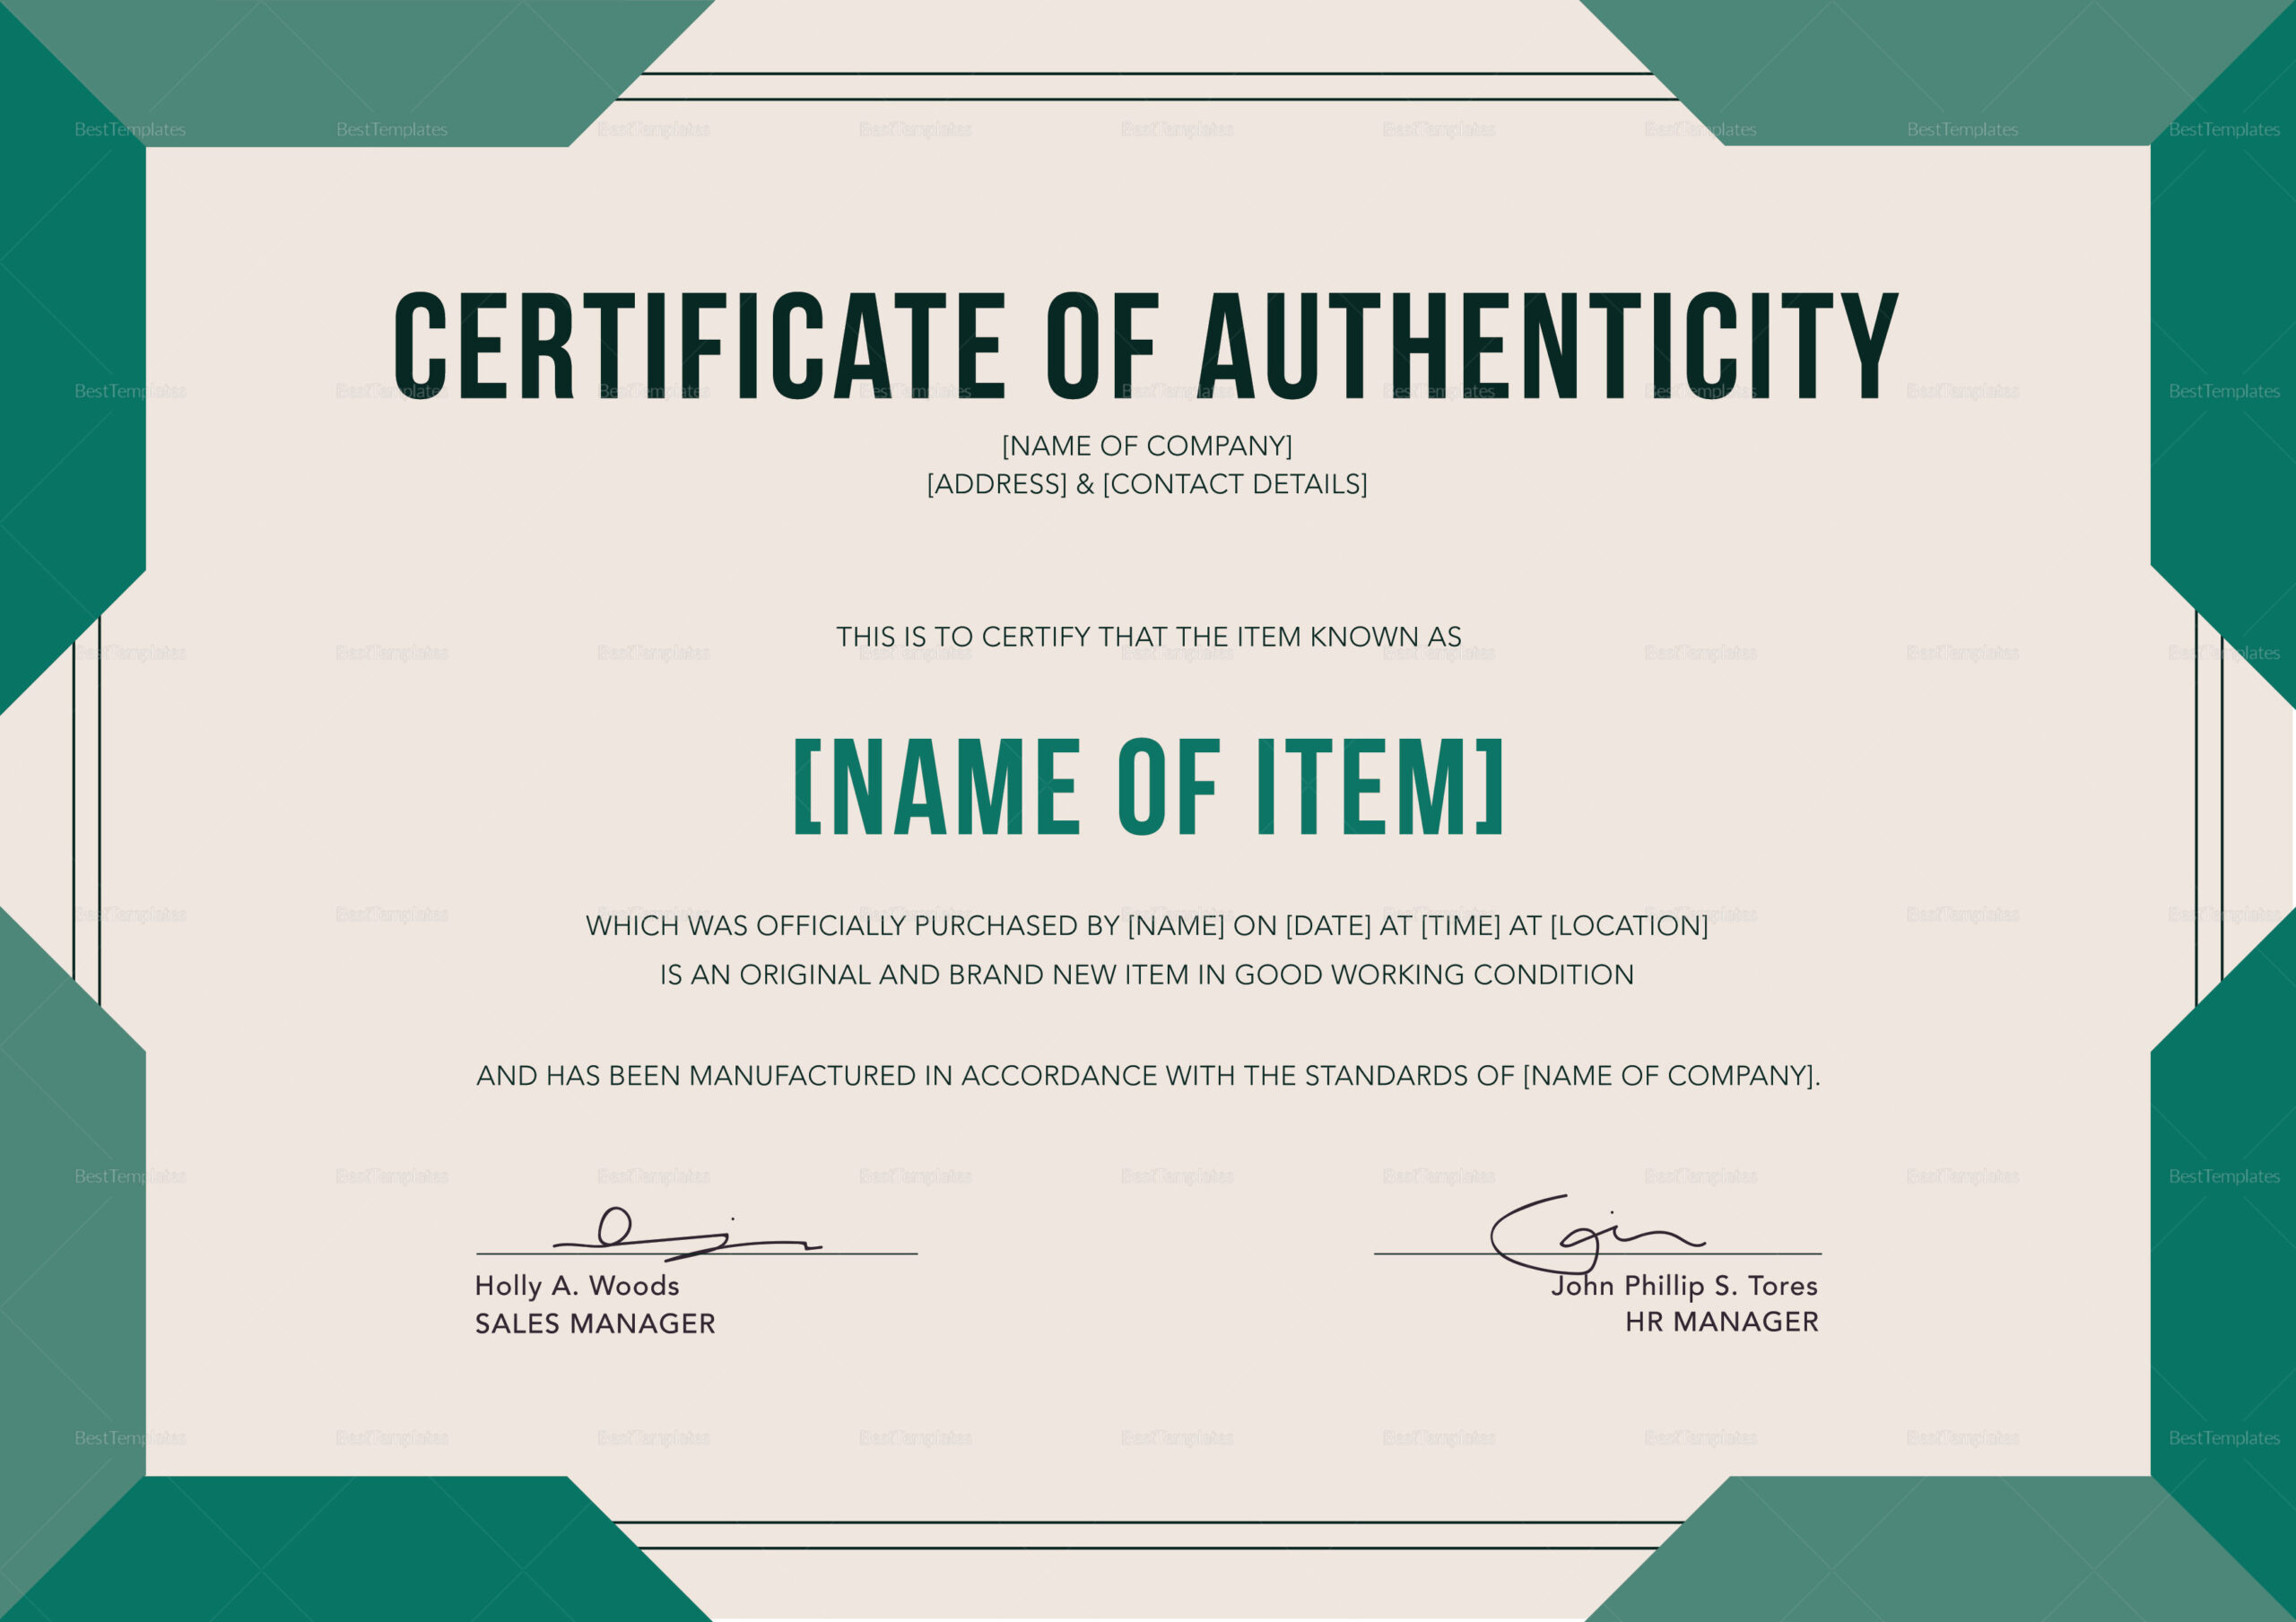 Elegant Certificate Of Authenticity Design Template In PSD, Word  Pertaining To Certificate Of Authenticity Template